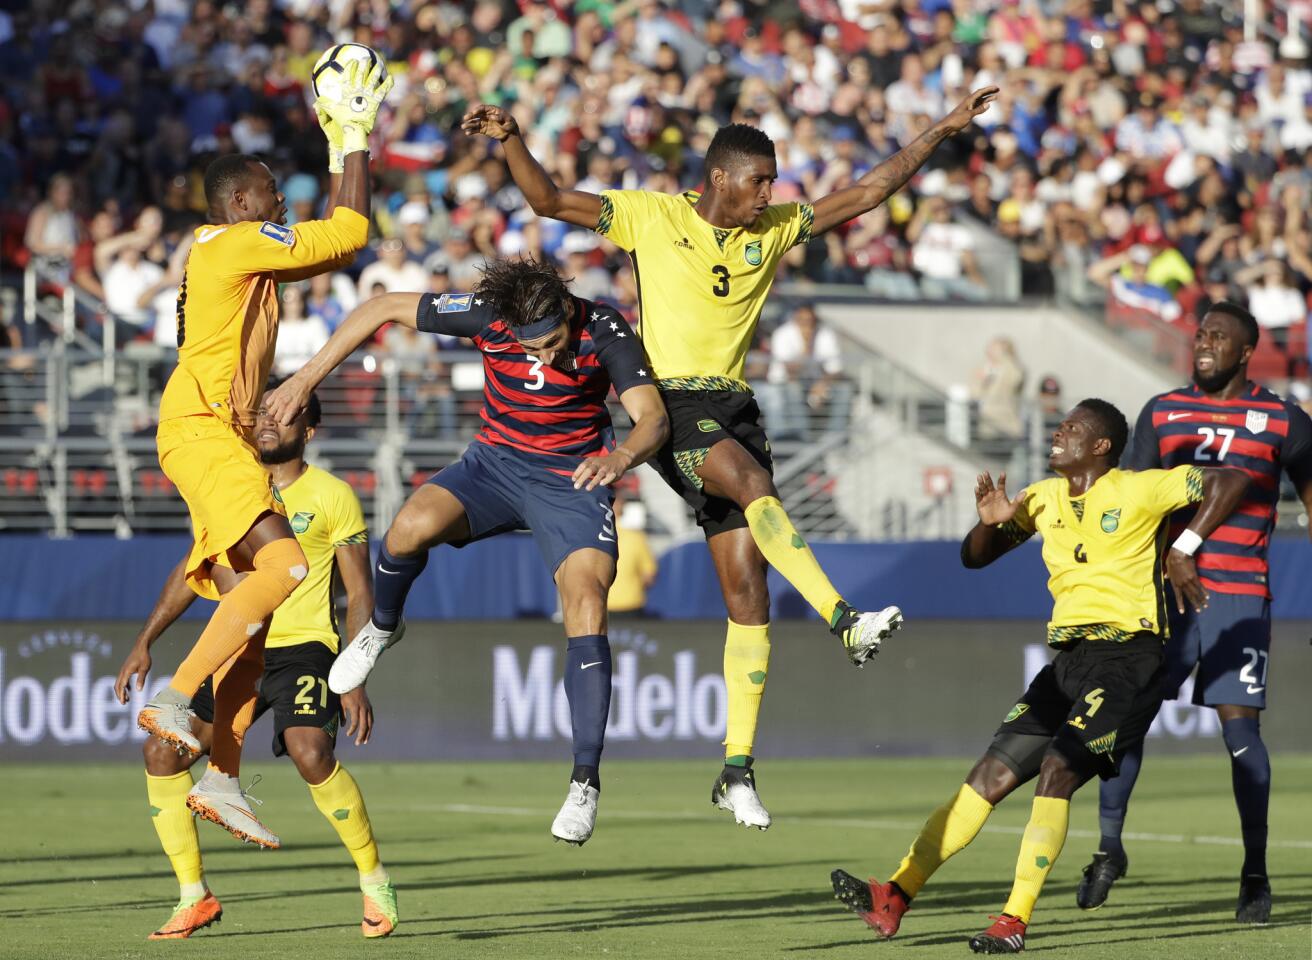 Jamaica goalkeeper Dwayne Miller, left, catches the ball over Damion Lowe, right, and United States' Omar Gonzalez, center, during the first half of the Gold Cup final soccer match in Santa Clara, Calif., Wednesday, July 26, 2017. (AP Photo/Marcio Jose Sanchez)